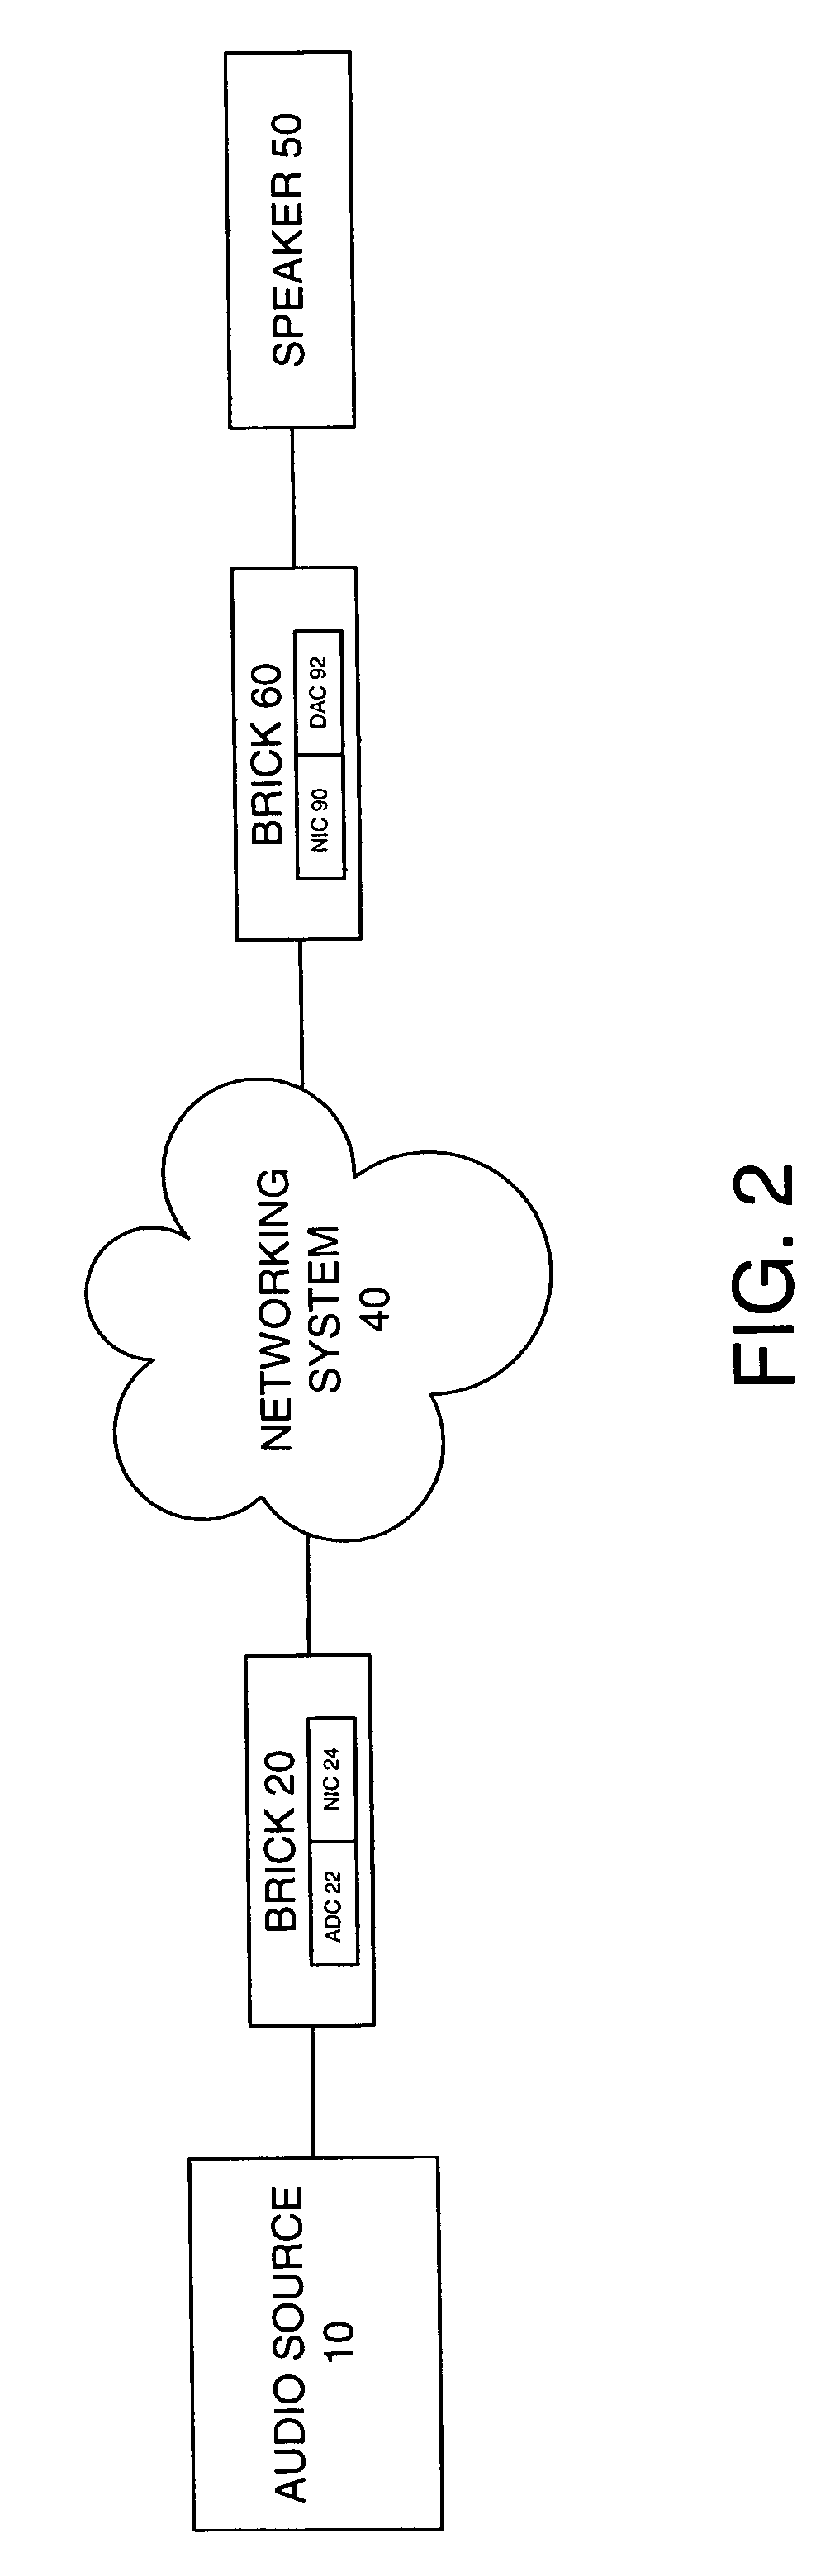 System and method for calibration of an acoustic system